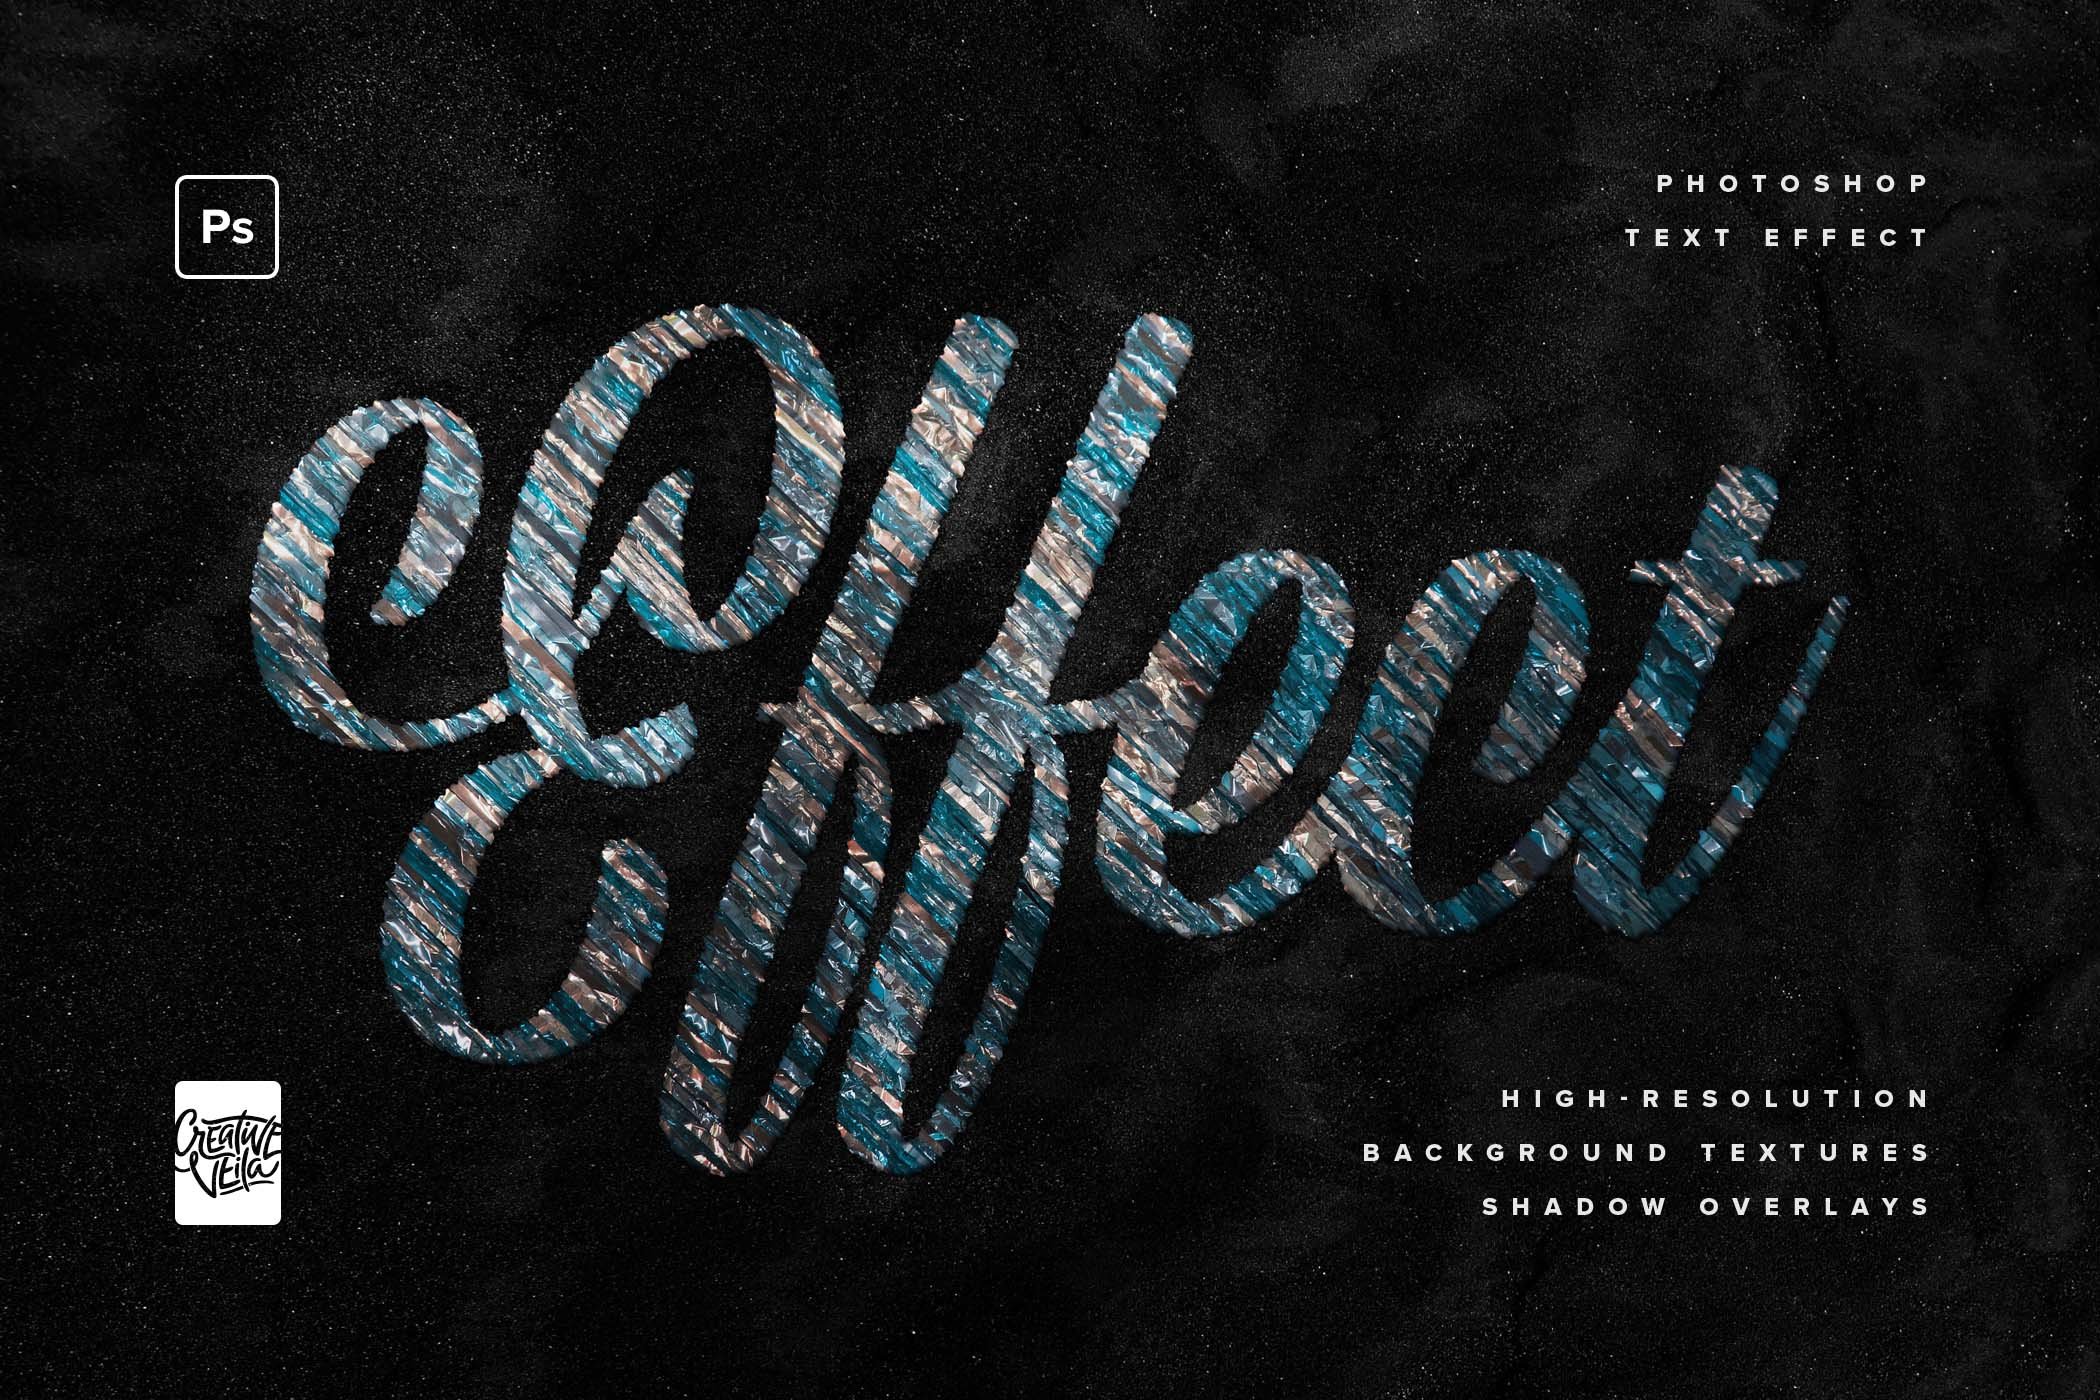 glitter photoshop text effects pack by creative veila 04 77